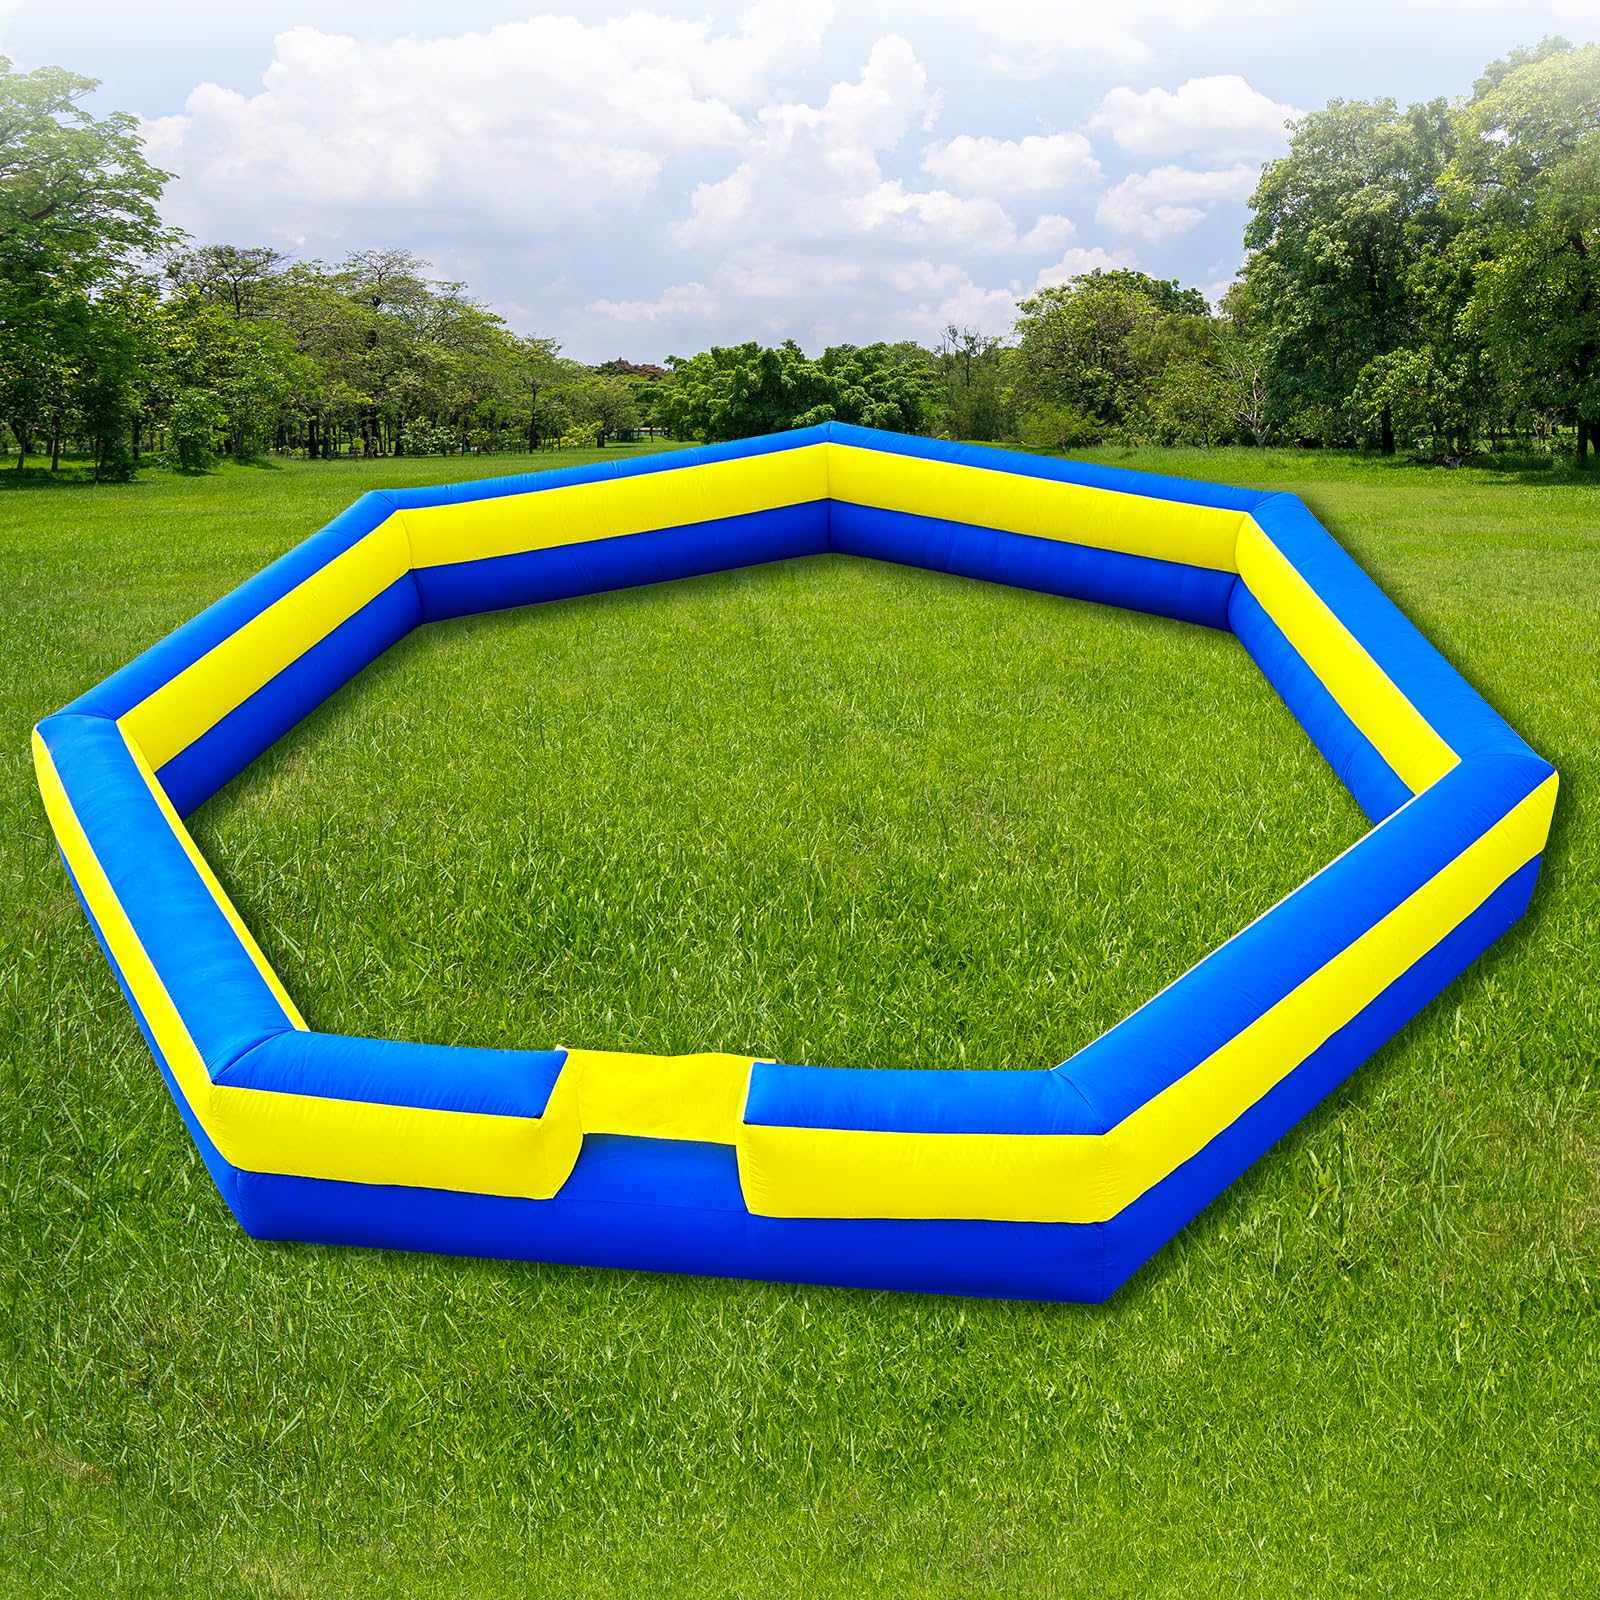 WARSUN 20ft Blue & Yellow Portable Gaga Ball Pit With Built-In Blower 150w Inflatable Gaga Ball Court For Indoor Outdoor School Family Activities Inflatable Sport Games